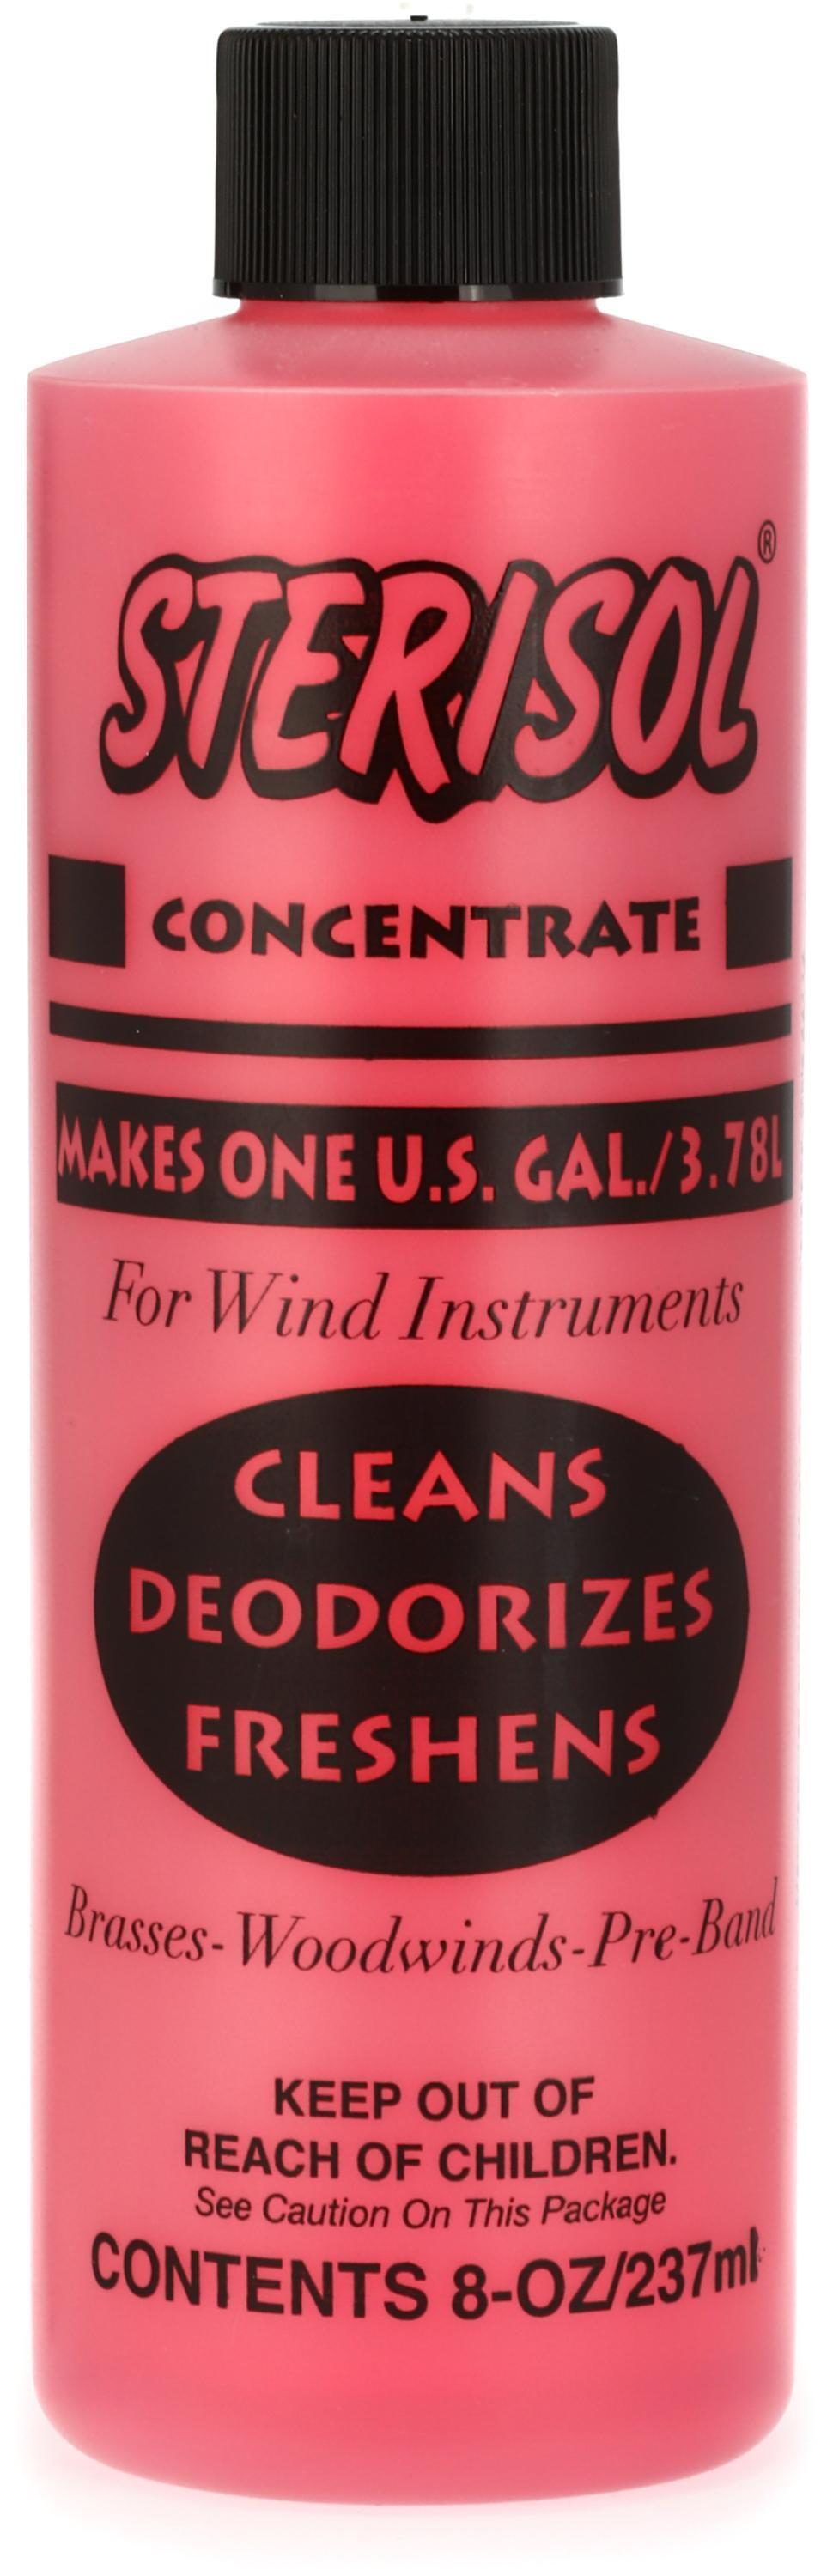 Speed Cleaning Red Juice Concentrate 32-oz. Bottle, Eco-friendly